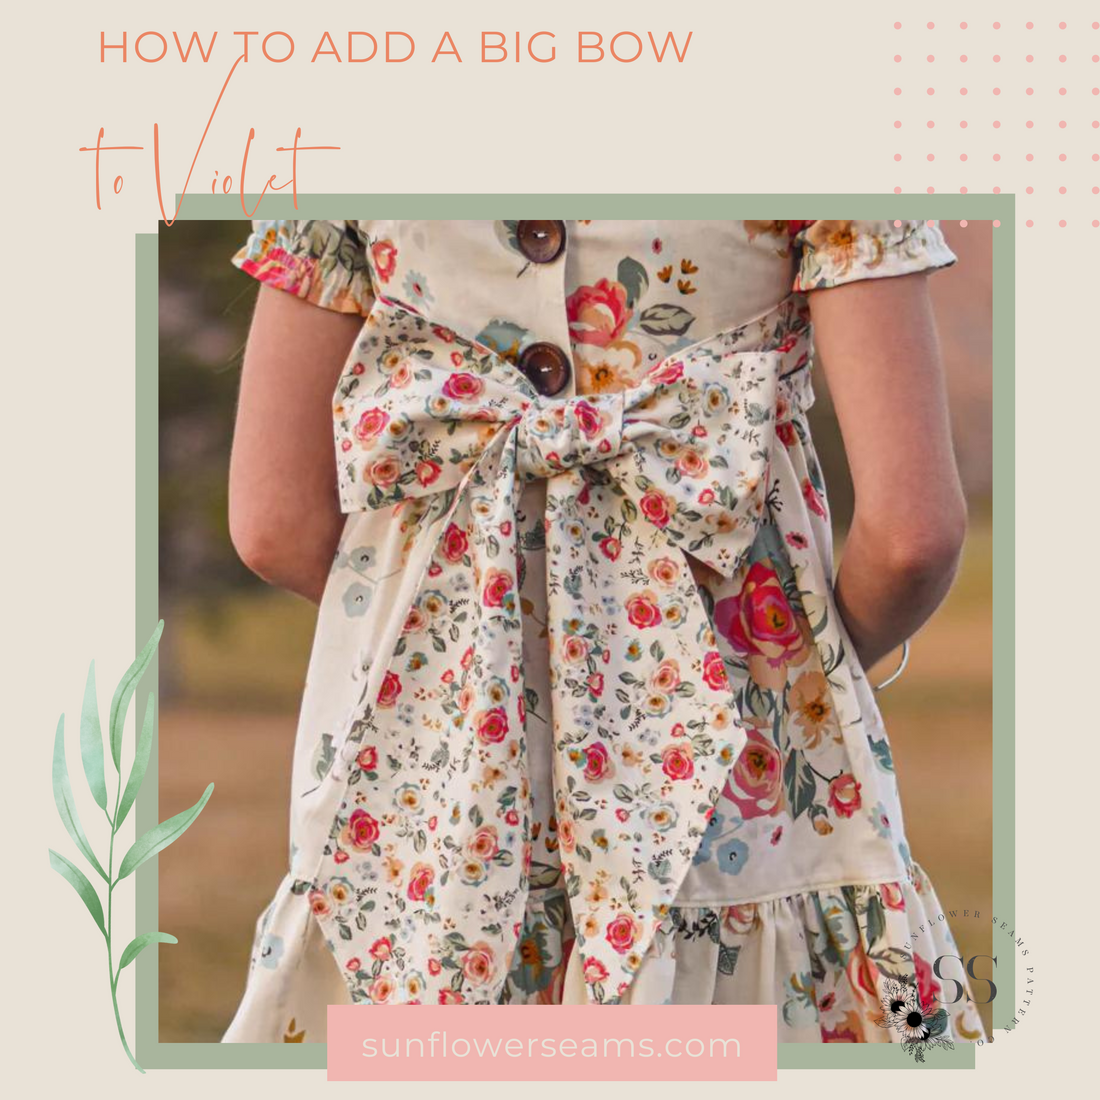 How to Add a Big Bow to Violet {A Tutorial}